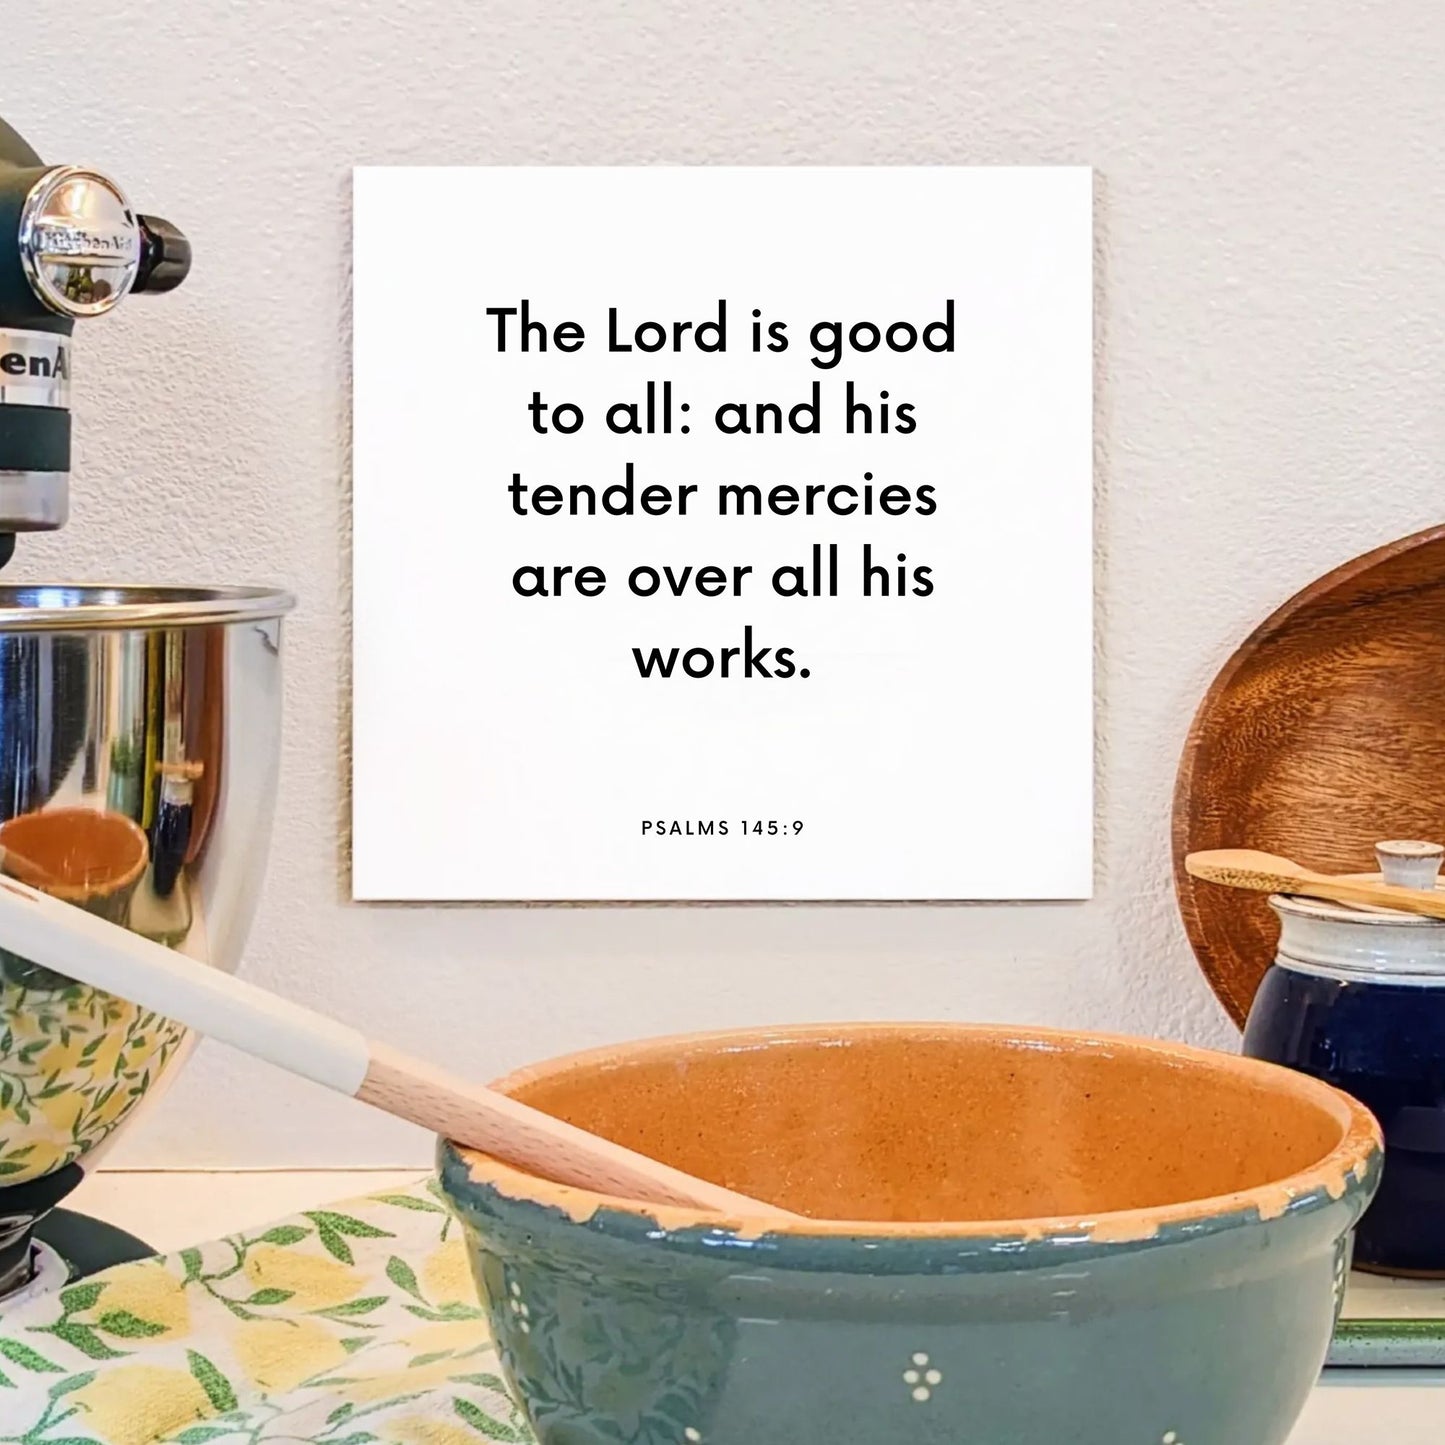 Kitchen mouting of the scripture tile for Psalms 145:9 - "His tender mercies are over all his works"